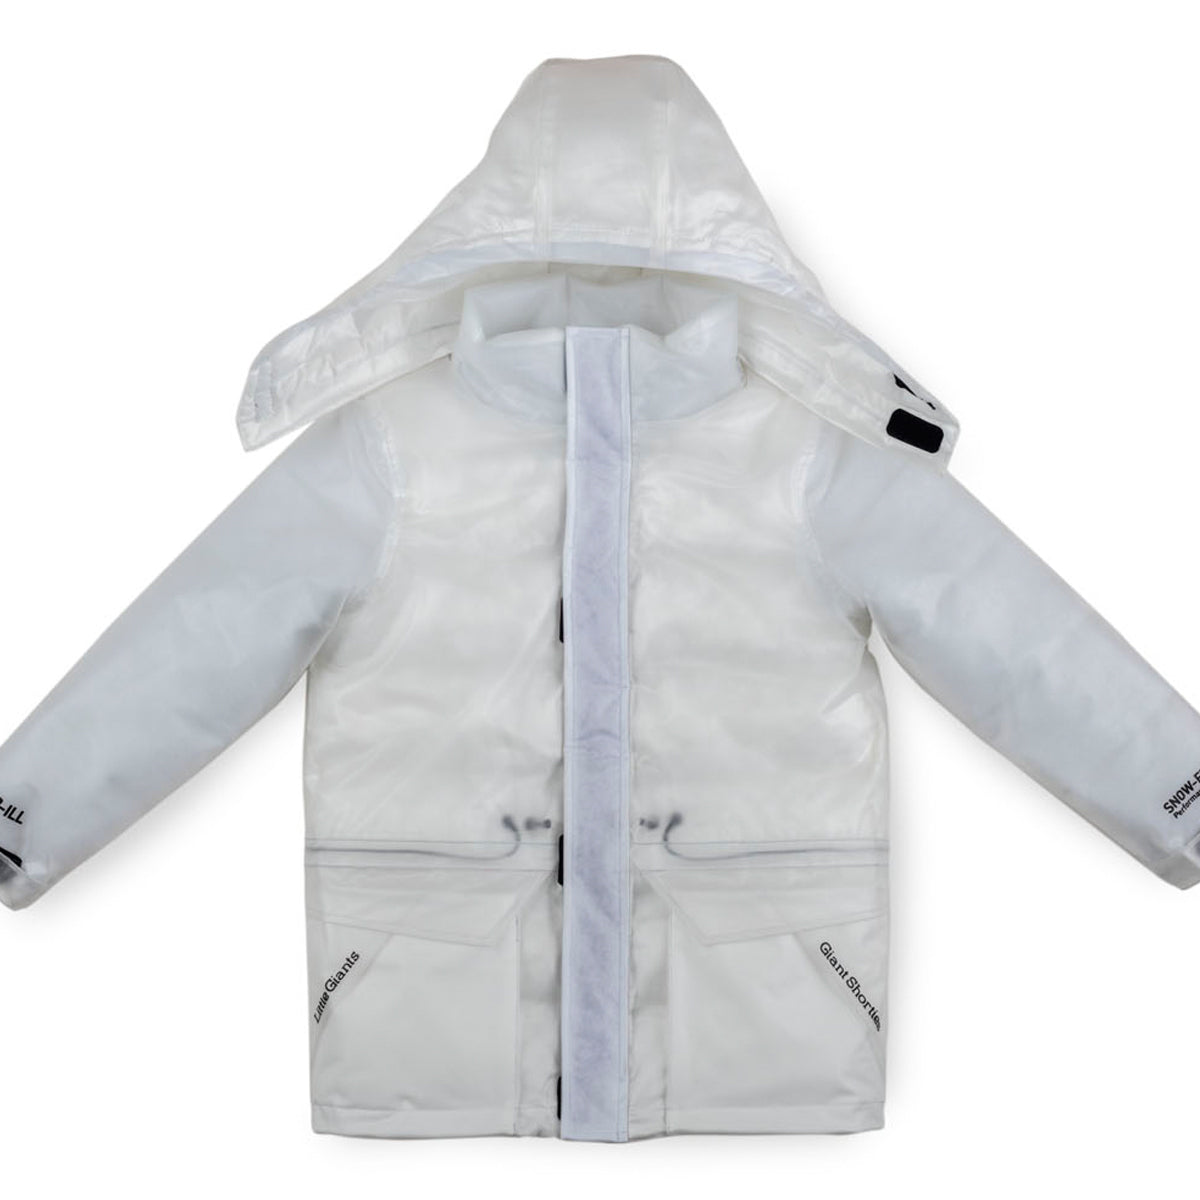 The "Baby Biggie" Jacket (Clear)